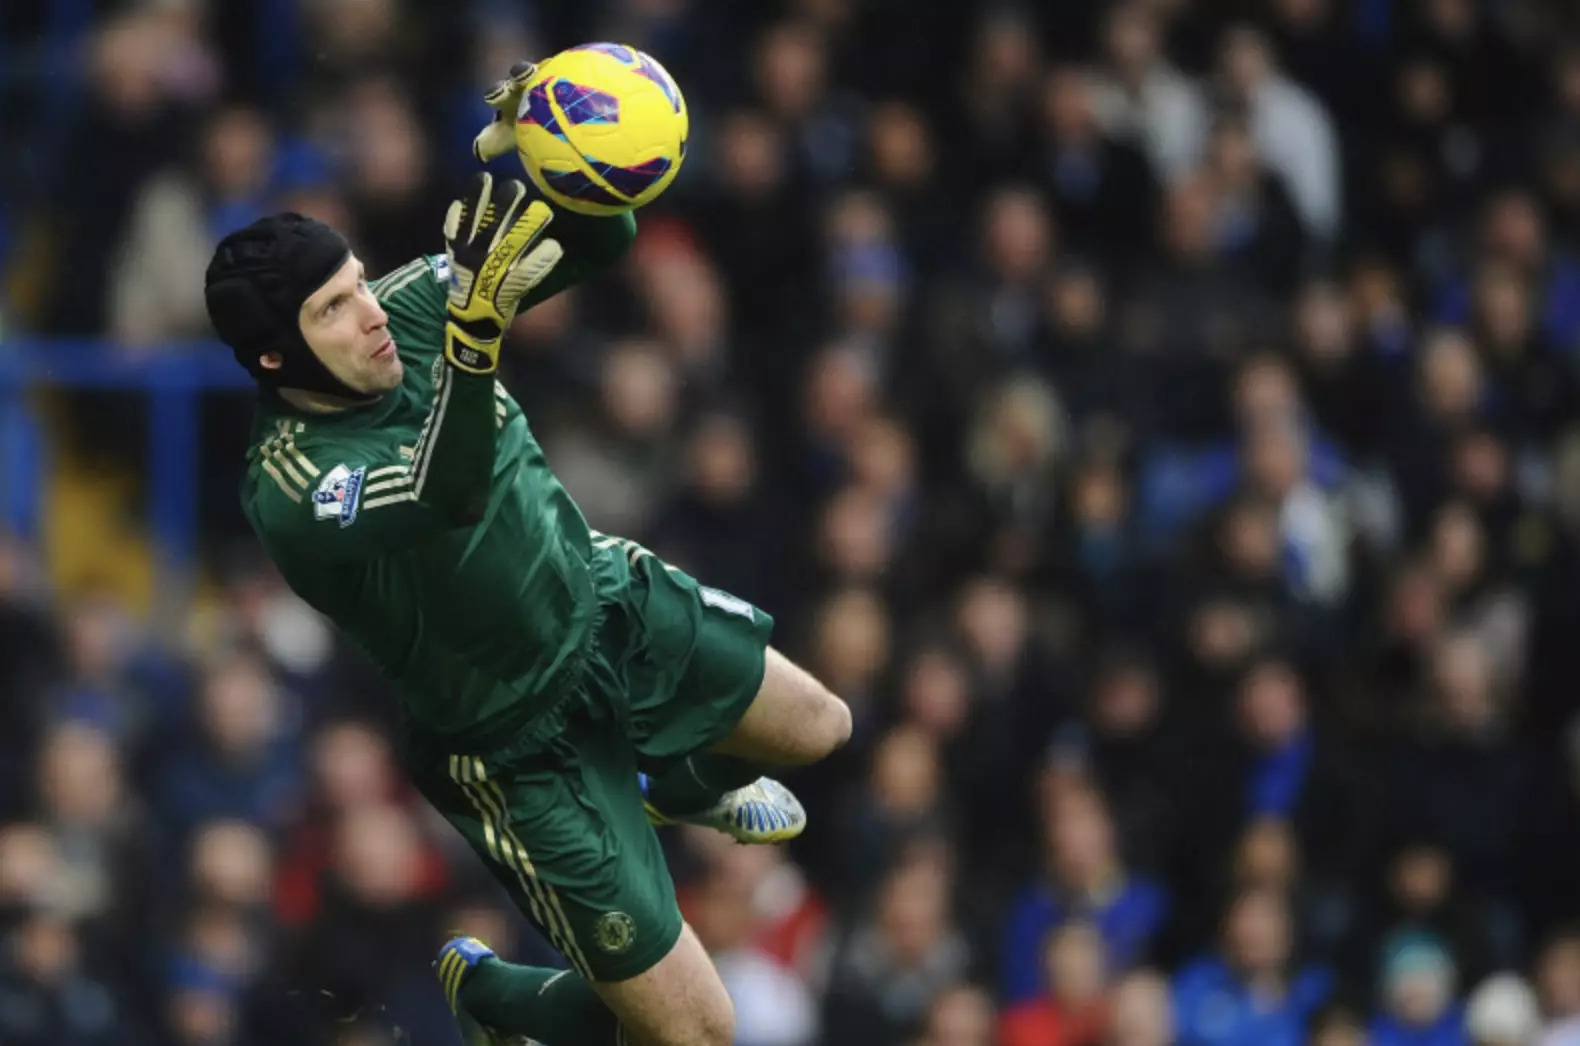 Petr Cech is arguably the greatest goalkeeper of the Premier League era